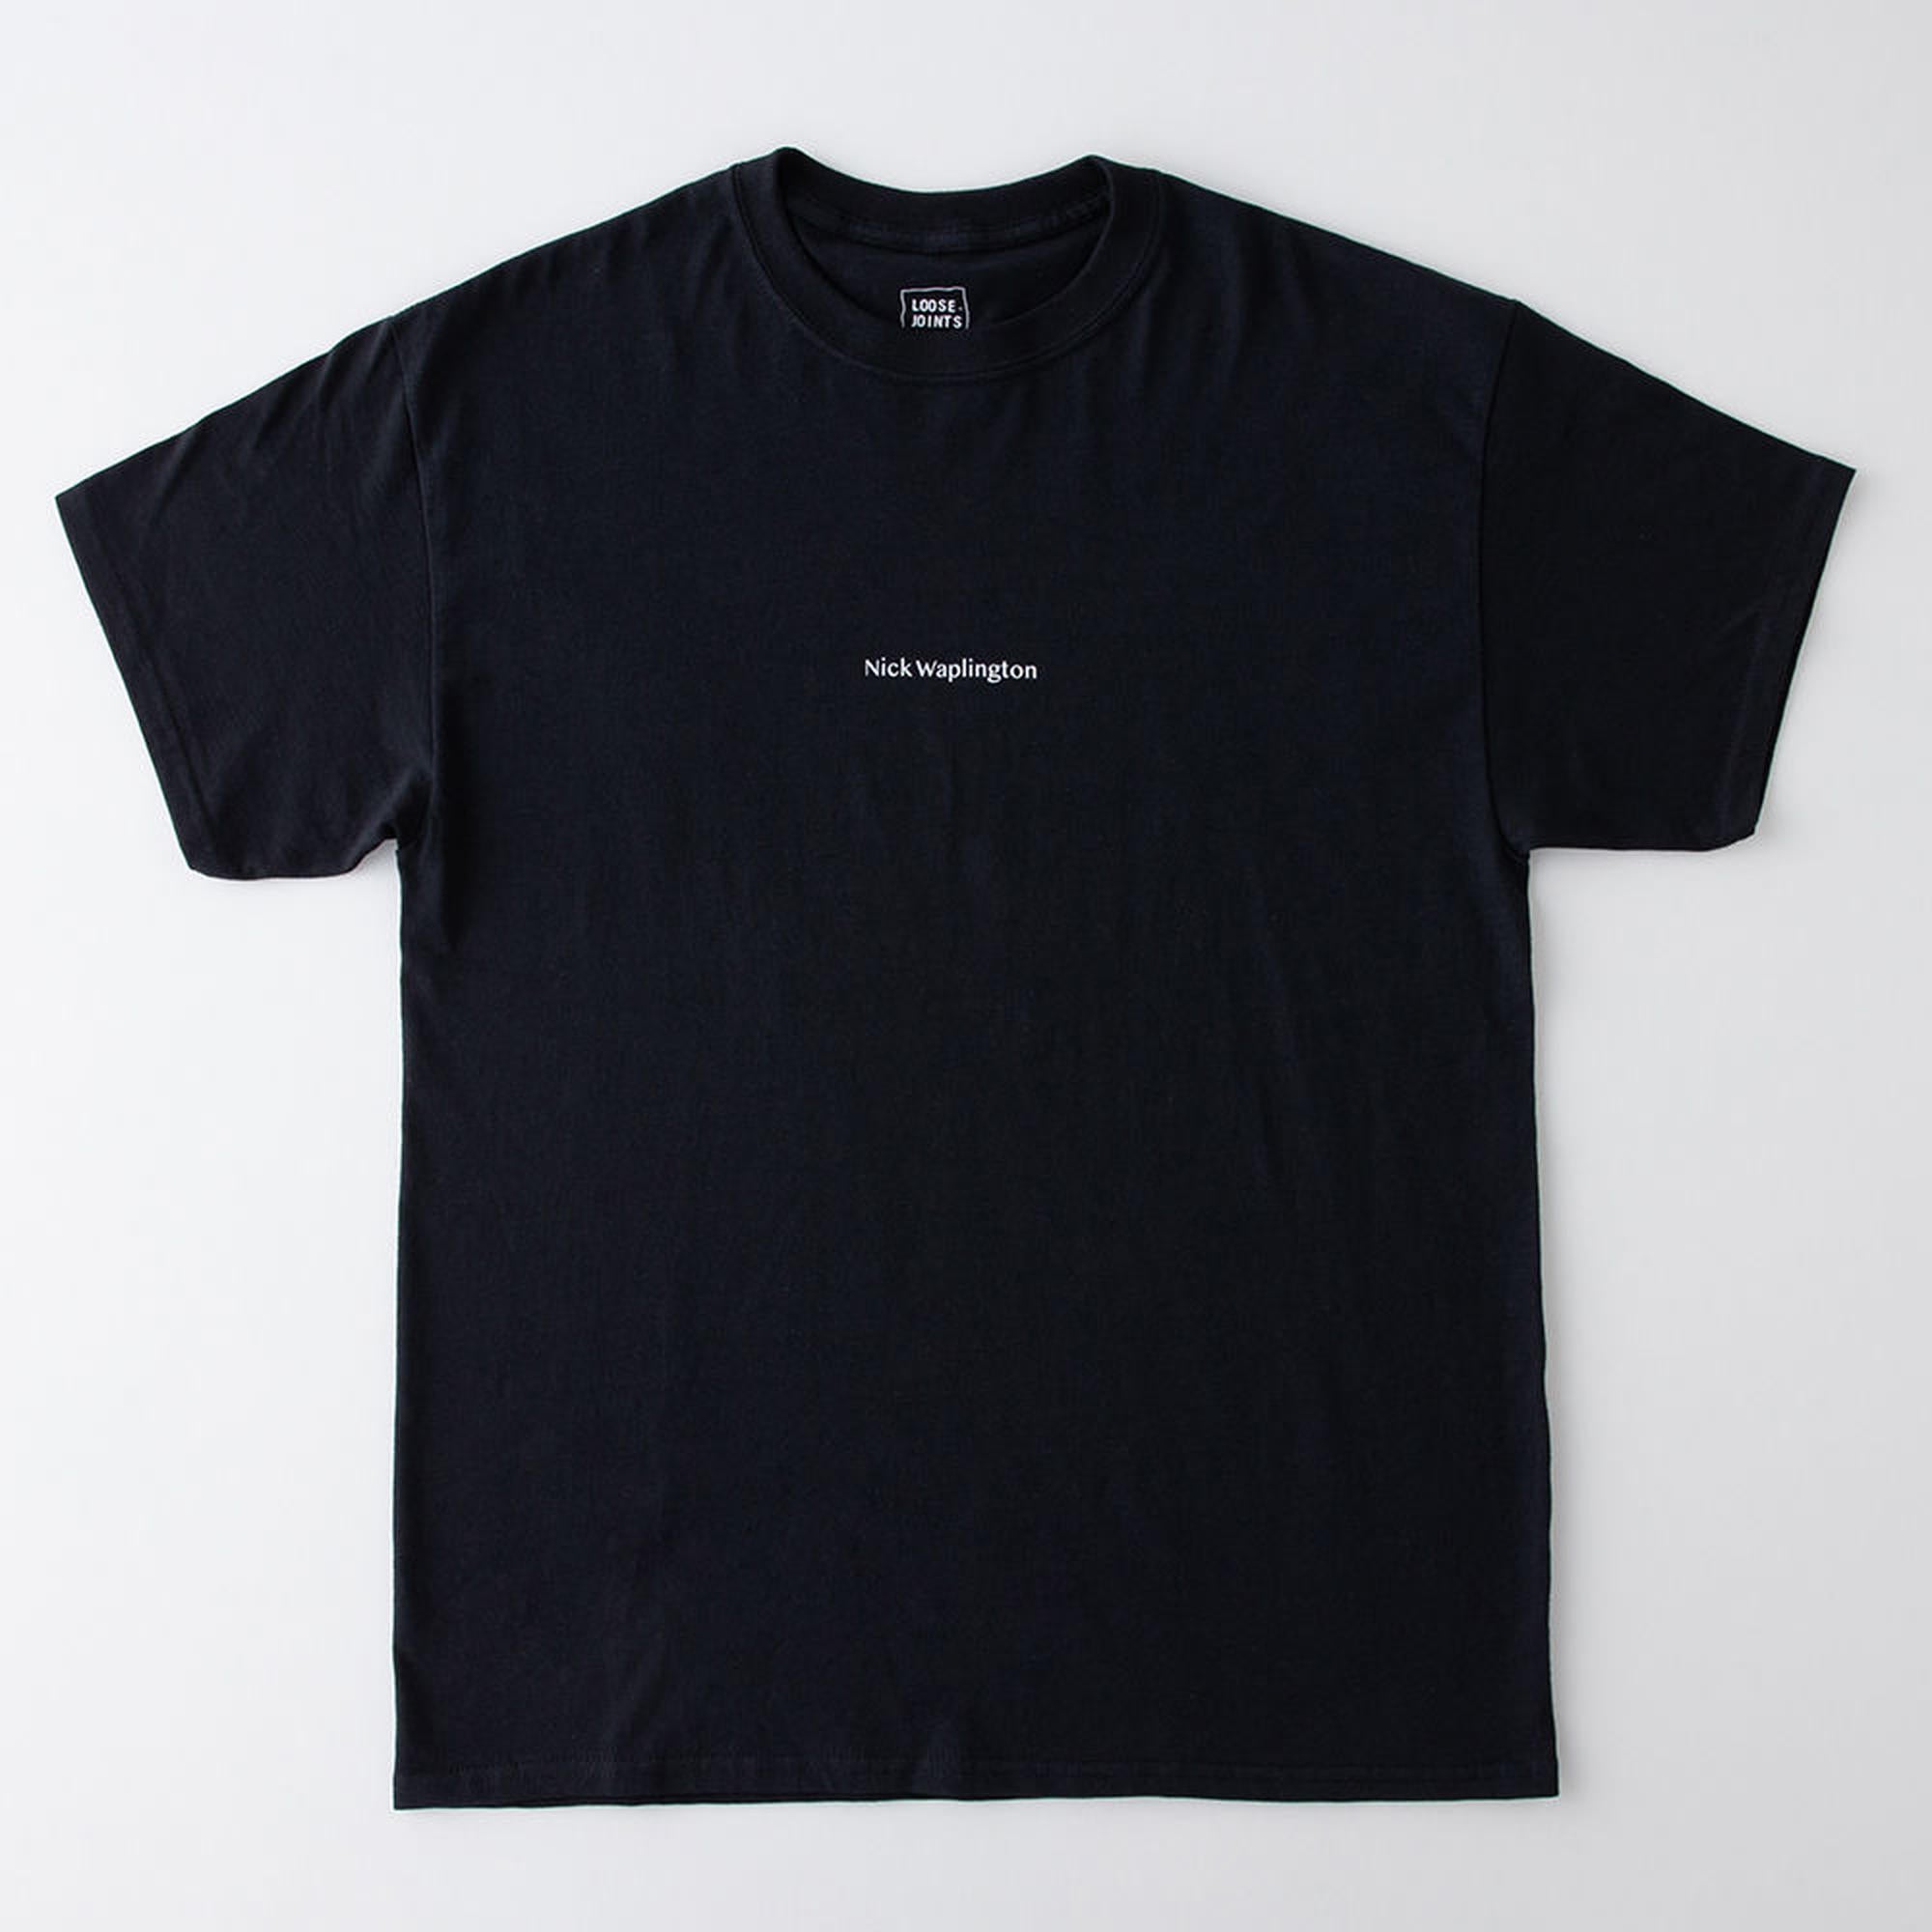 NICK WAPLINGTON - 'The Search For Superior Moral Justification For Selfishness' S/S TEE